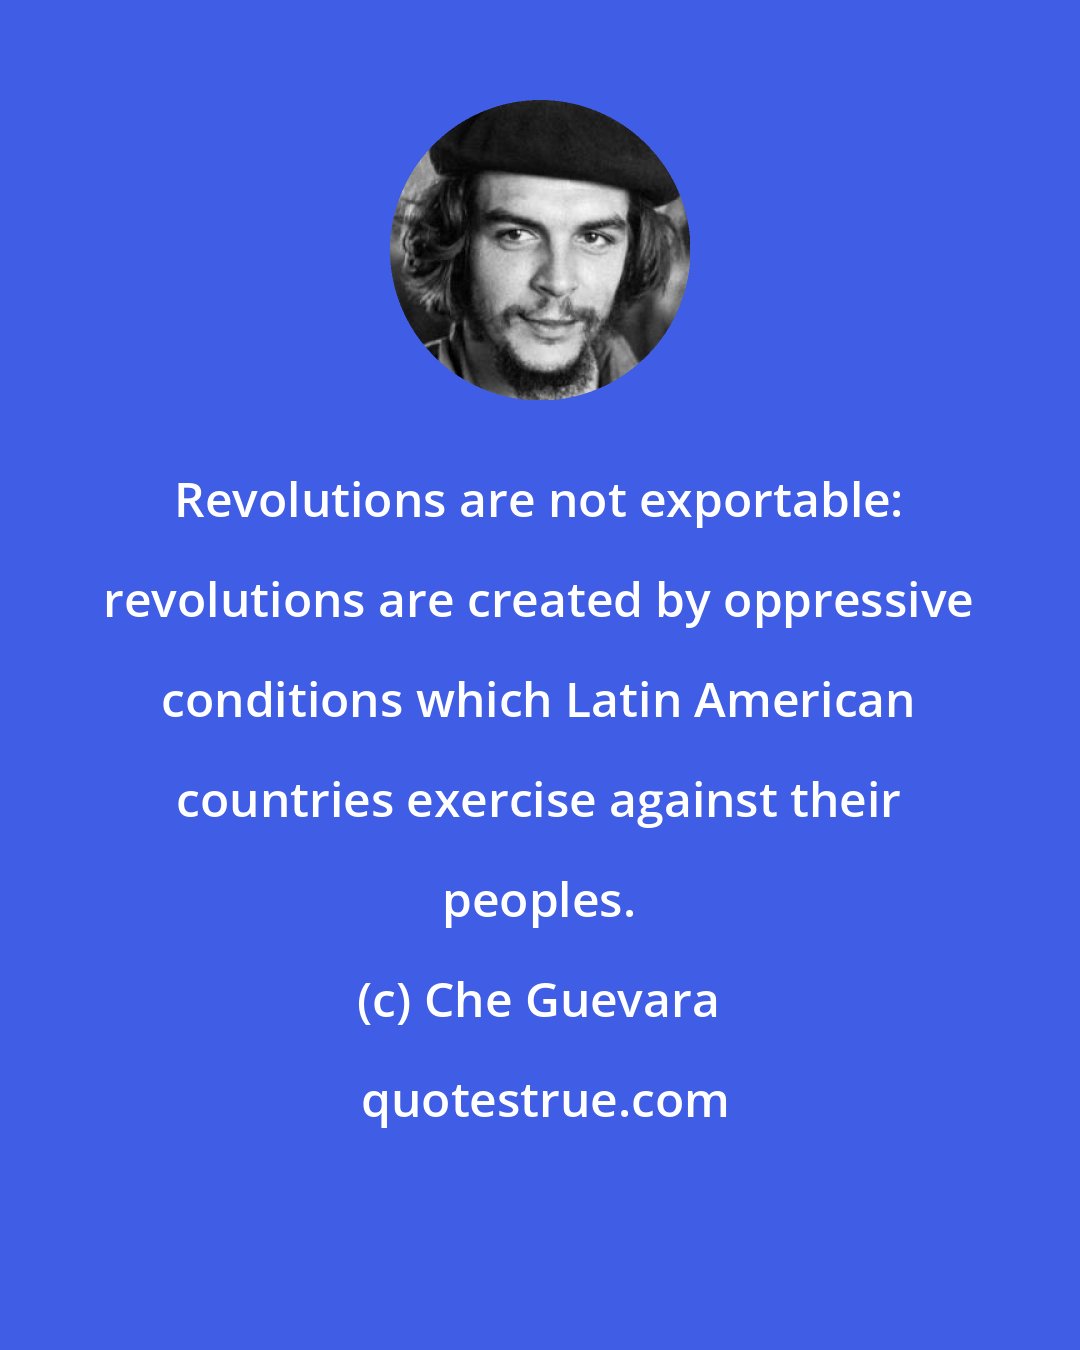 Che Guevara: Revolutions are not exportable: revolutions are created by oppressive conditions which Latin American countries exercise against their peoples.